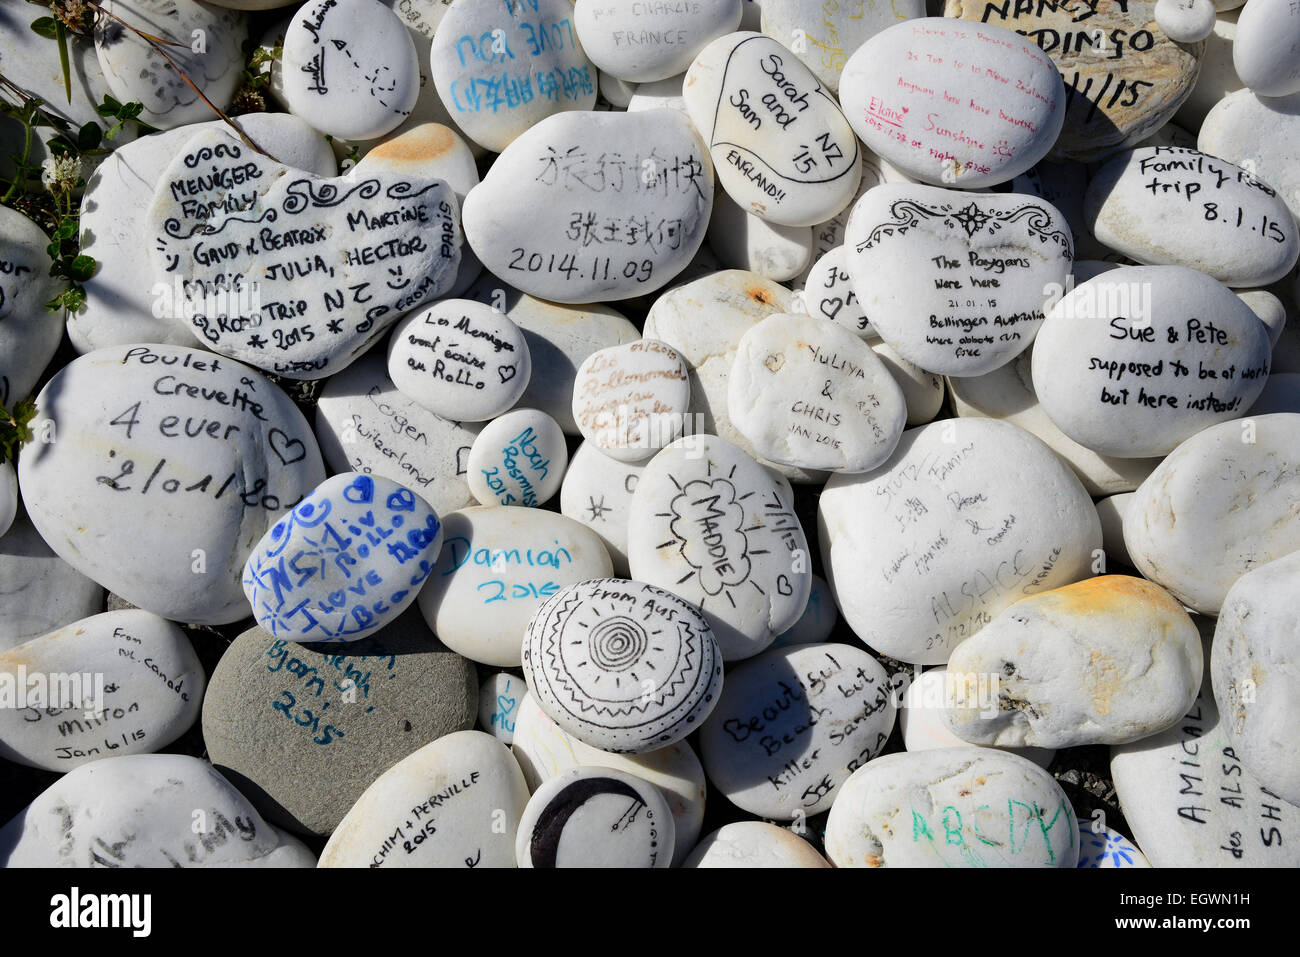 Painted stones with messages left by travellers at Ship Creek in the Tauparikākā Marine reserve, on the west coast of South Island New Zealand. Stock Photo